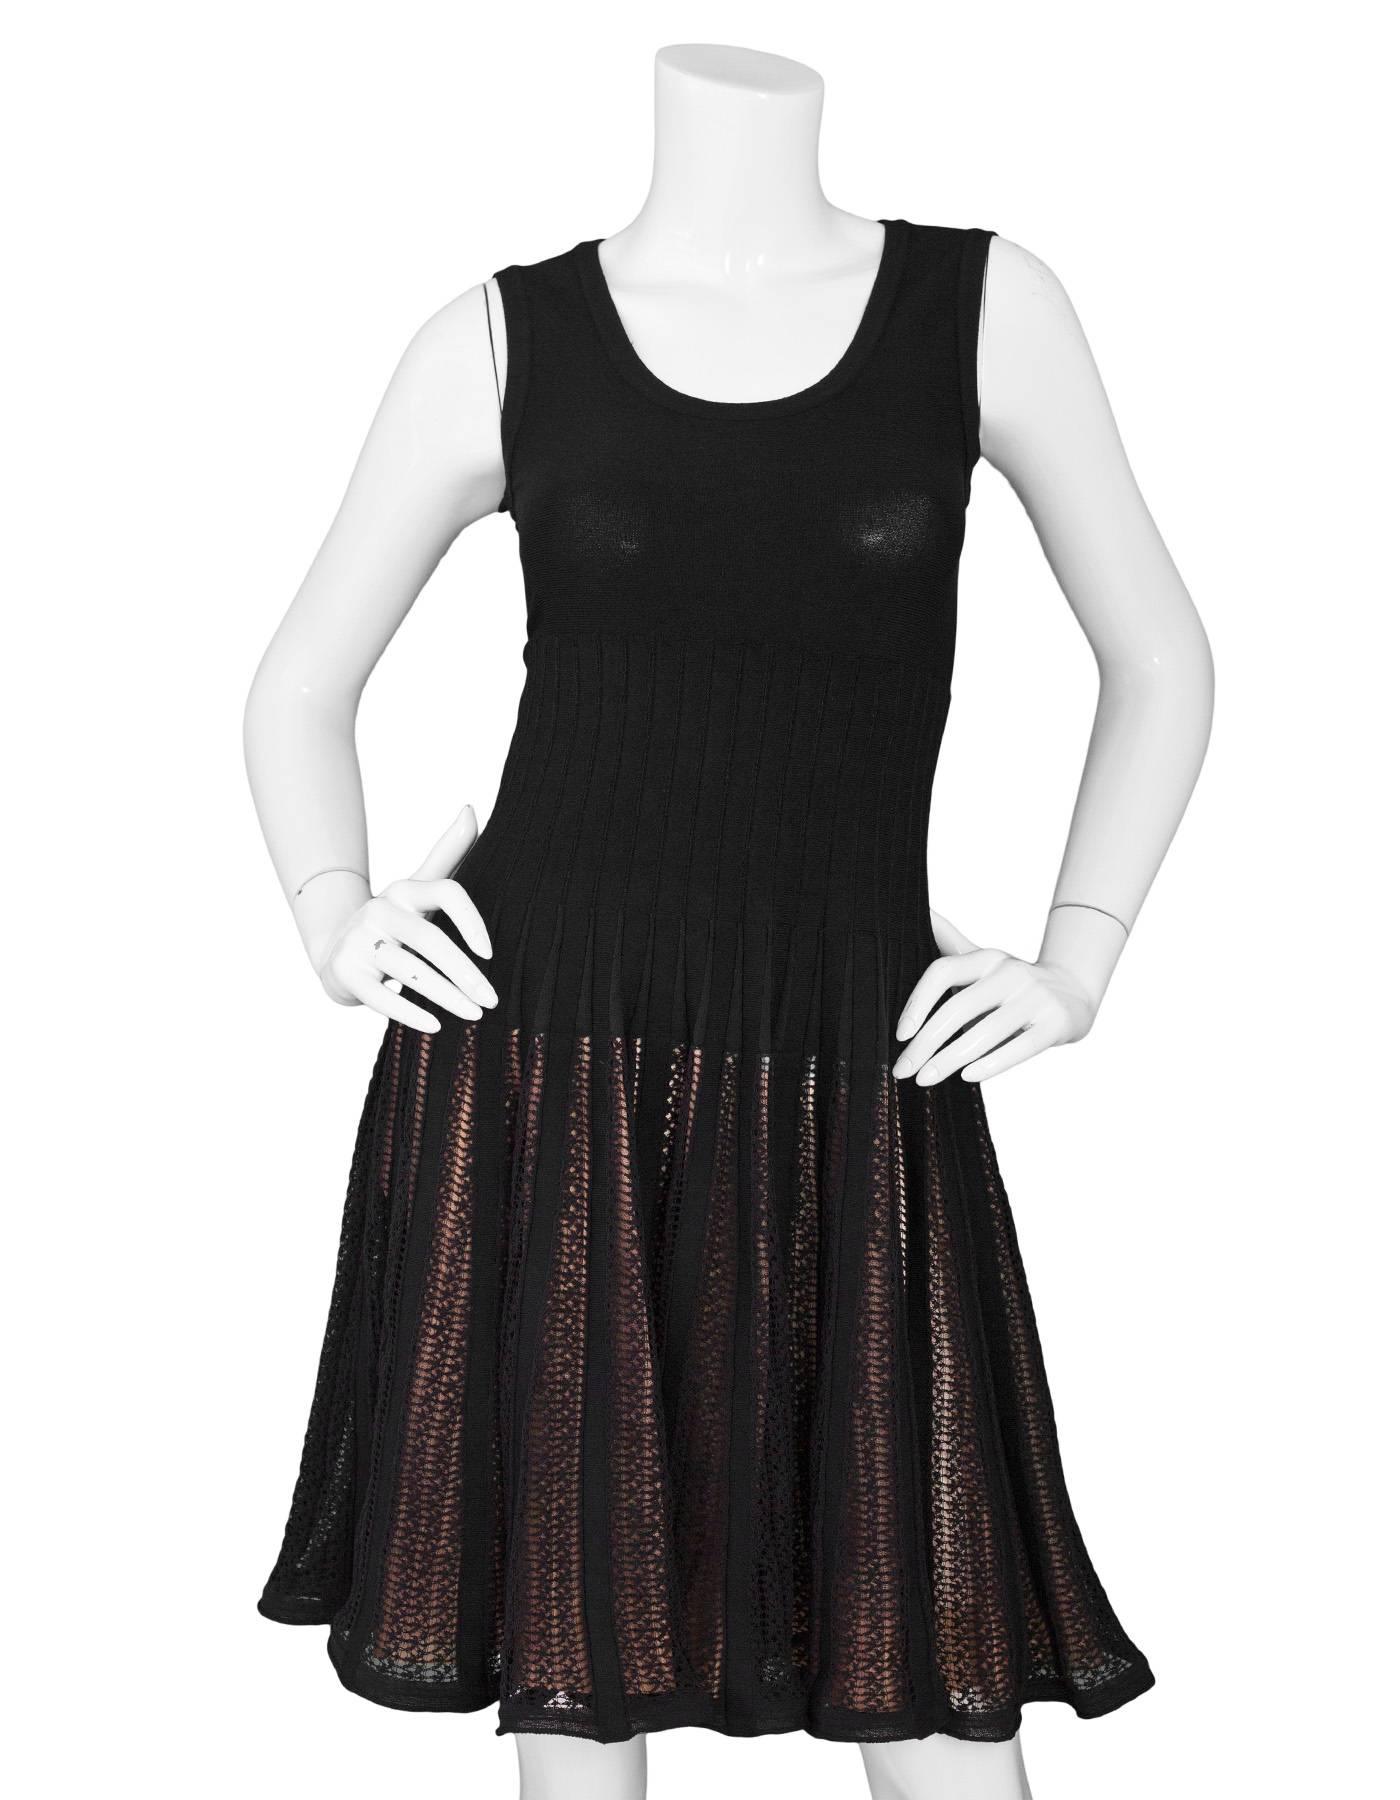 Alaia Black Skater Dress with Nude Underlay Sz FR40

Made In: Italy
Color: Black, nude
Composition: 50% viscose, 20% cotton, 10% silk, 10% nylon, 10% polyester
Lining: Nude underlay at skirt
Closure/Opening: Back zip closure
Exterior Pockets: